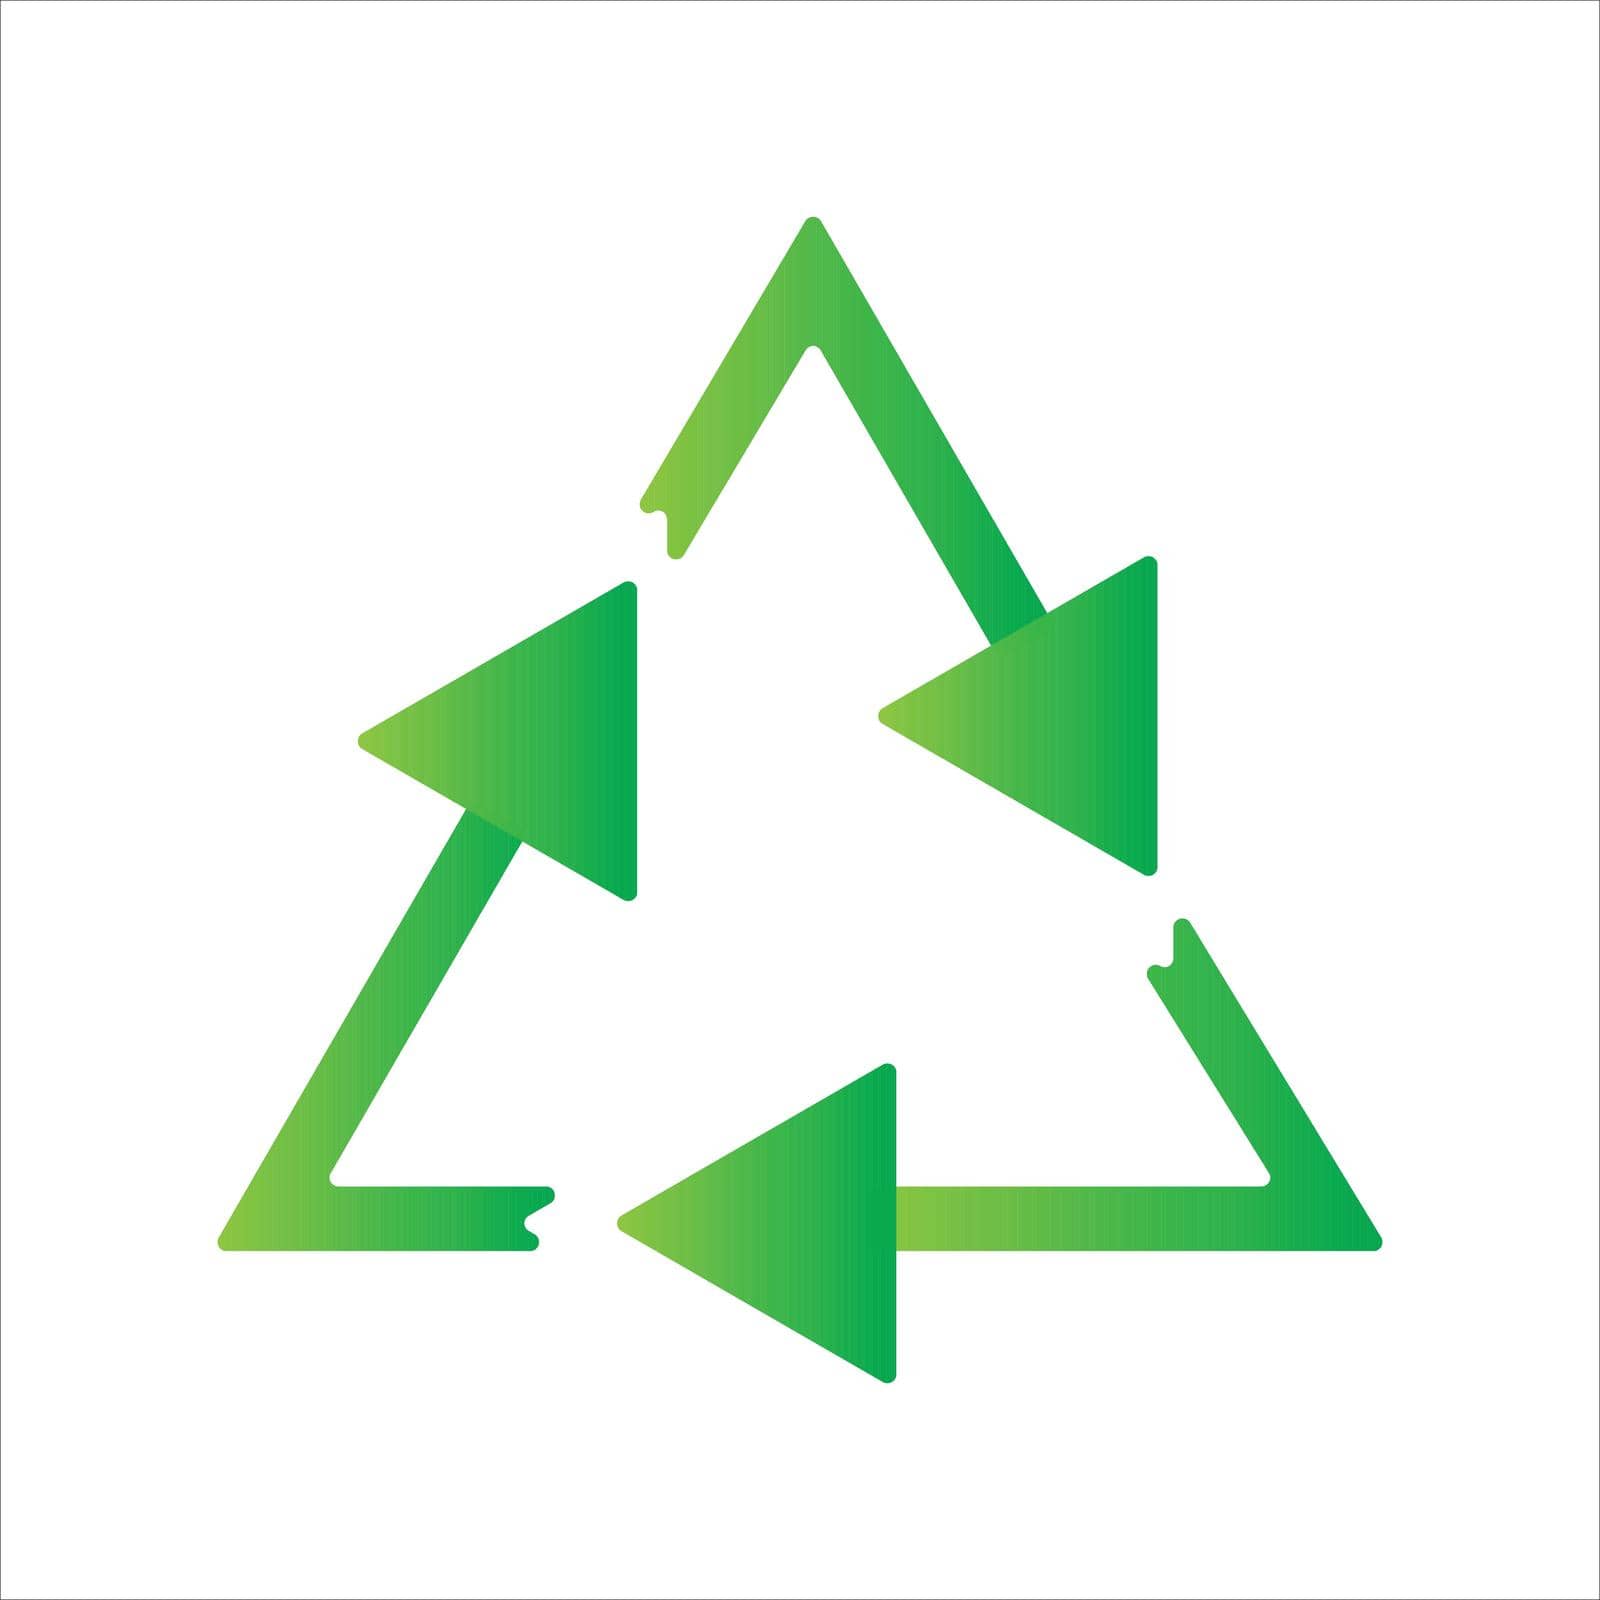 recycling ilustration icon.gradient style design style icon concept by sekitarief